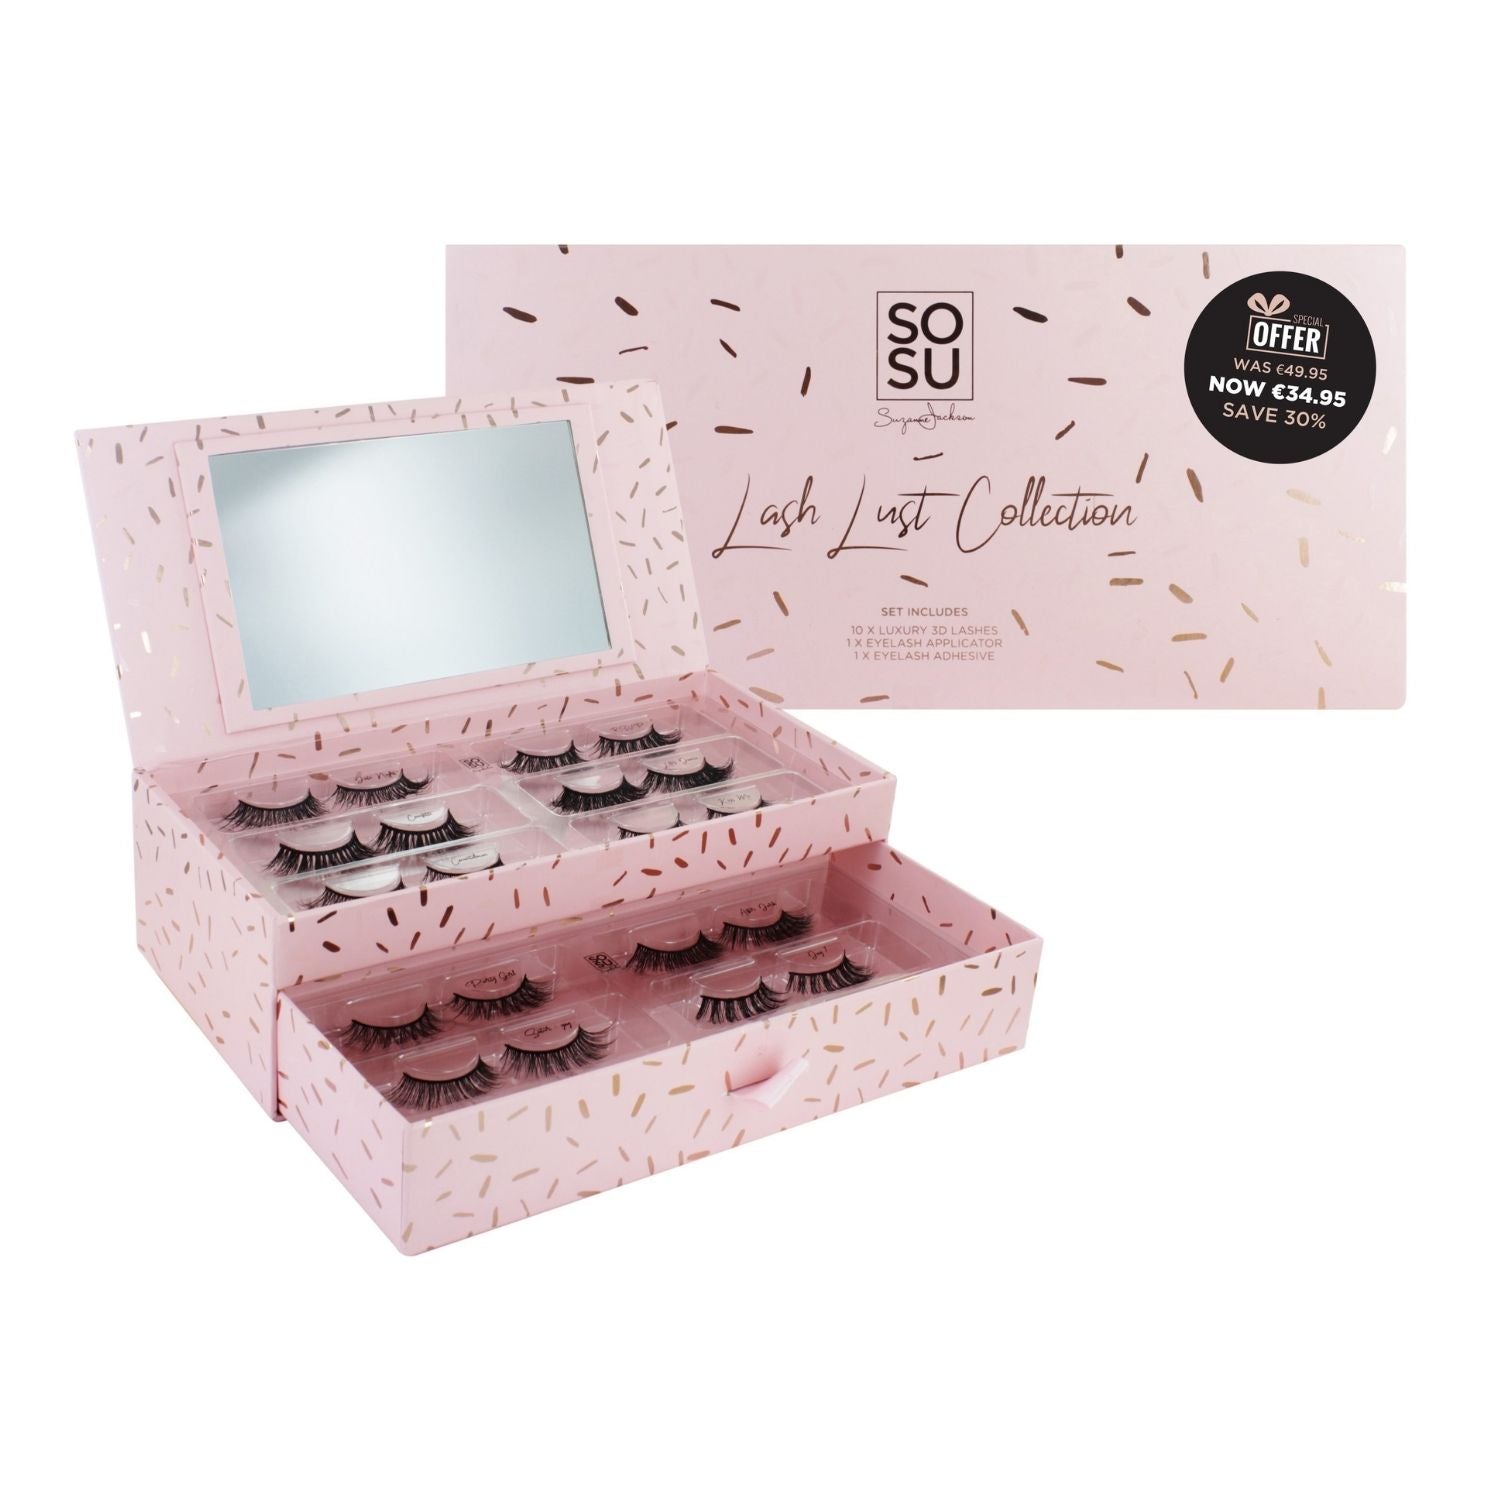 Sosu Lash Lust Collection 1 Shaws Department Stores